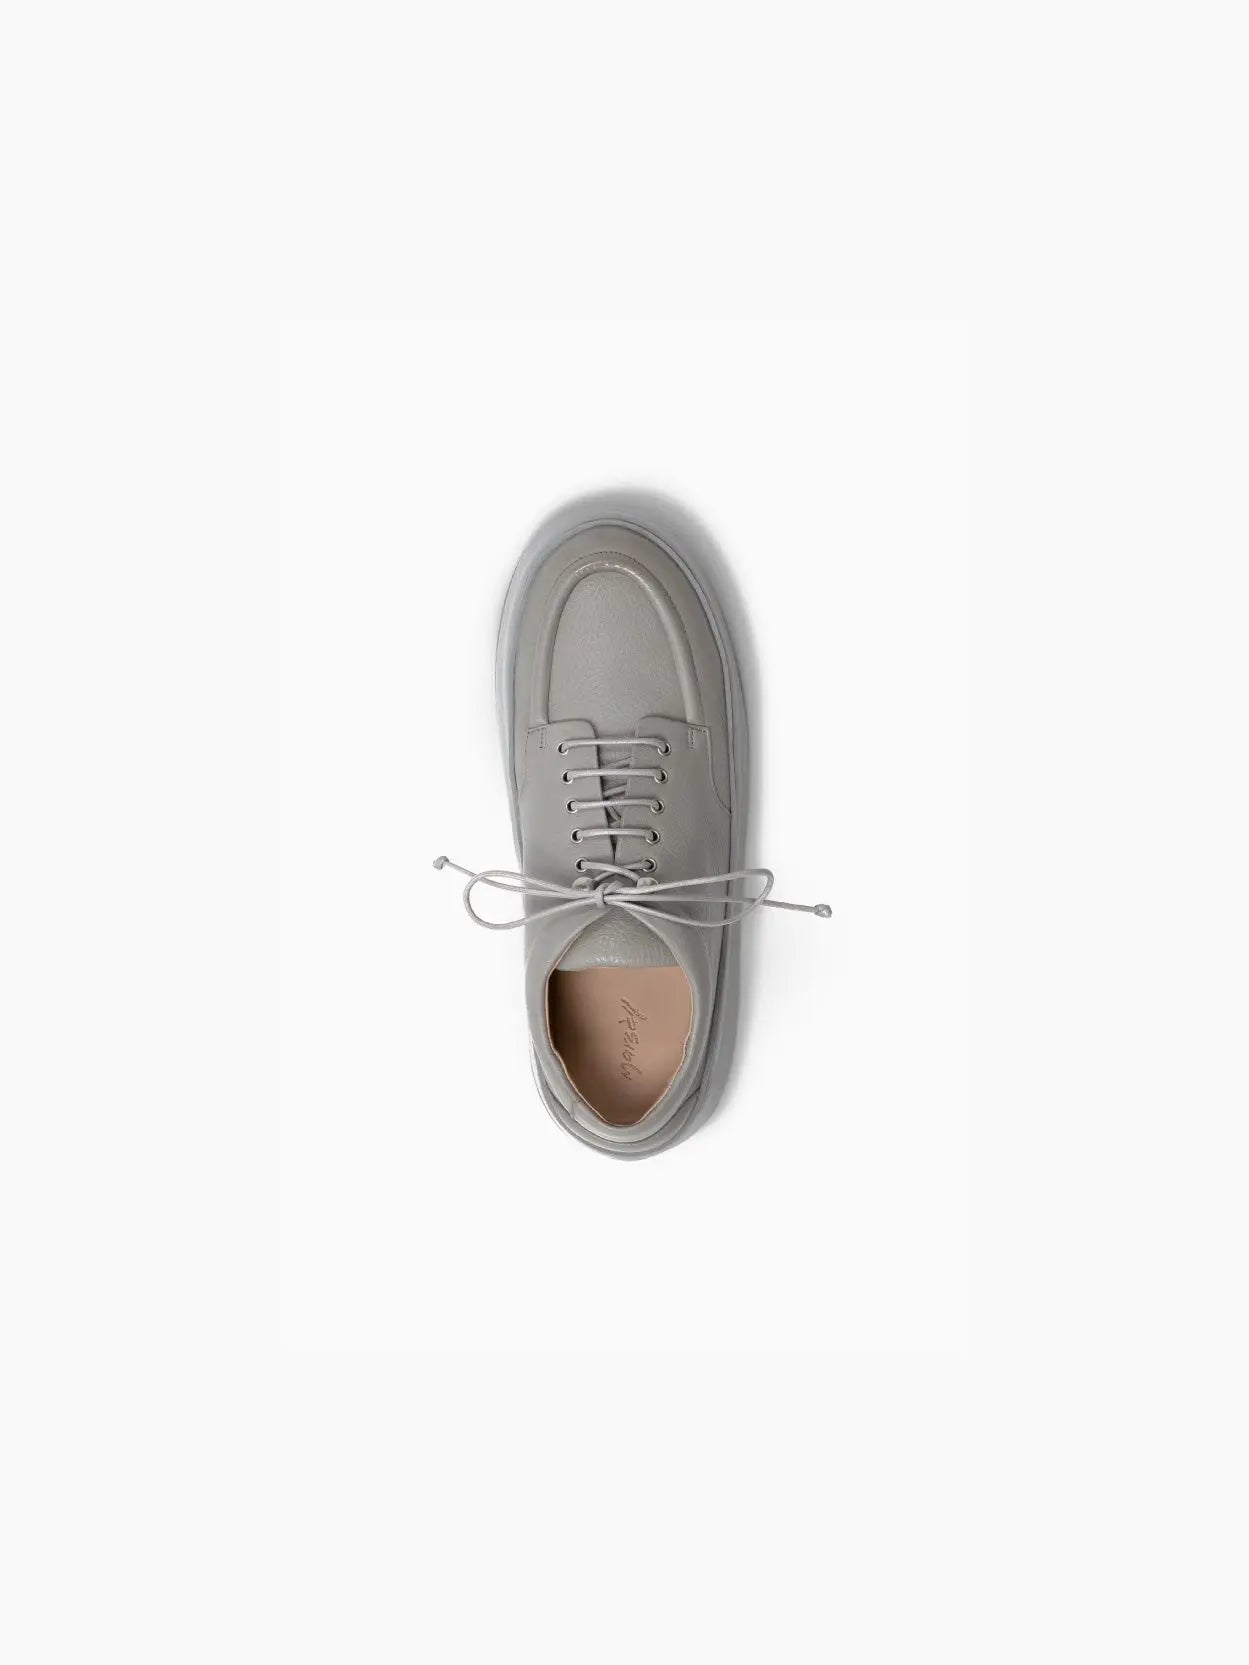 A single beige Cassapana Derby Asphalt sneaker by Marsèll with a thick, gray sole is shown against a plain white background. The shoe, available at Bassalstore in Barcelona, features a lace-up design with matching beige laces and a minimalist, modern silhouette.